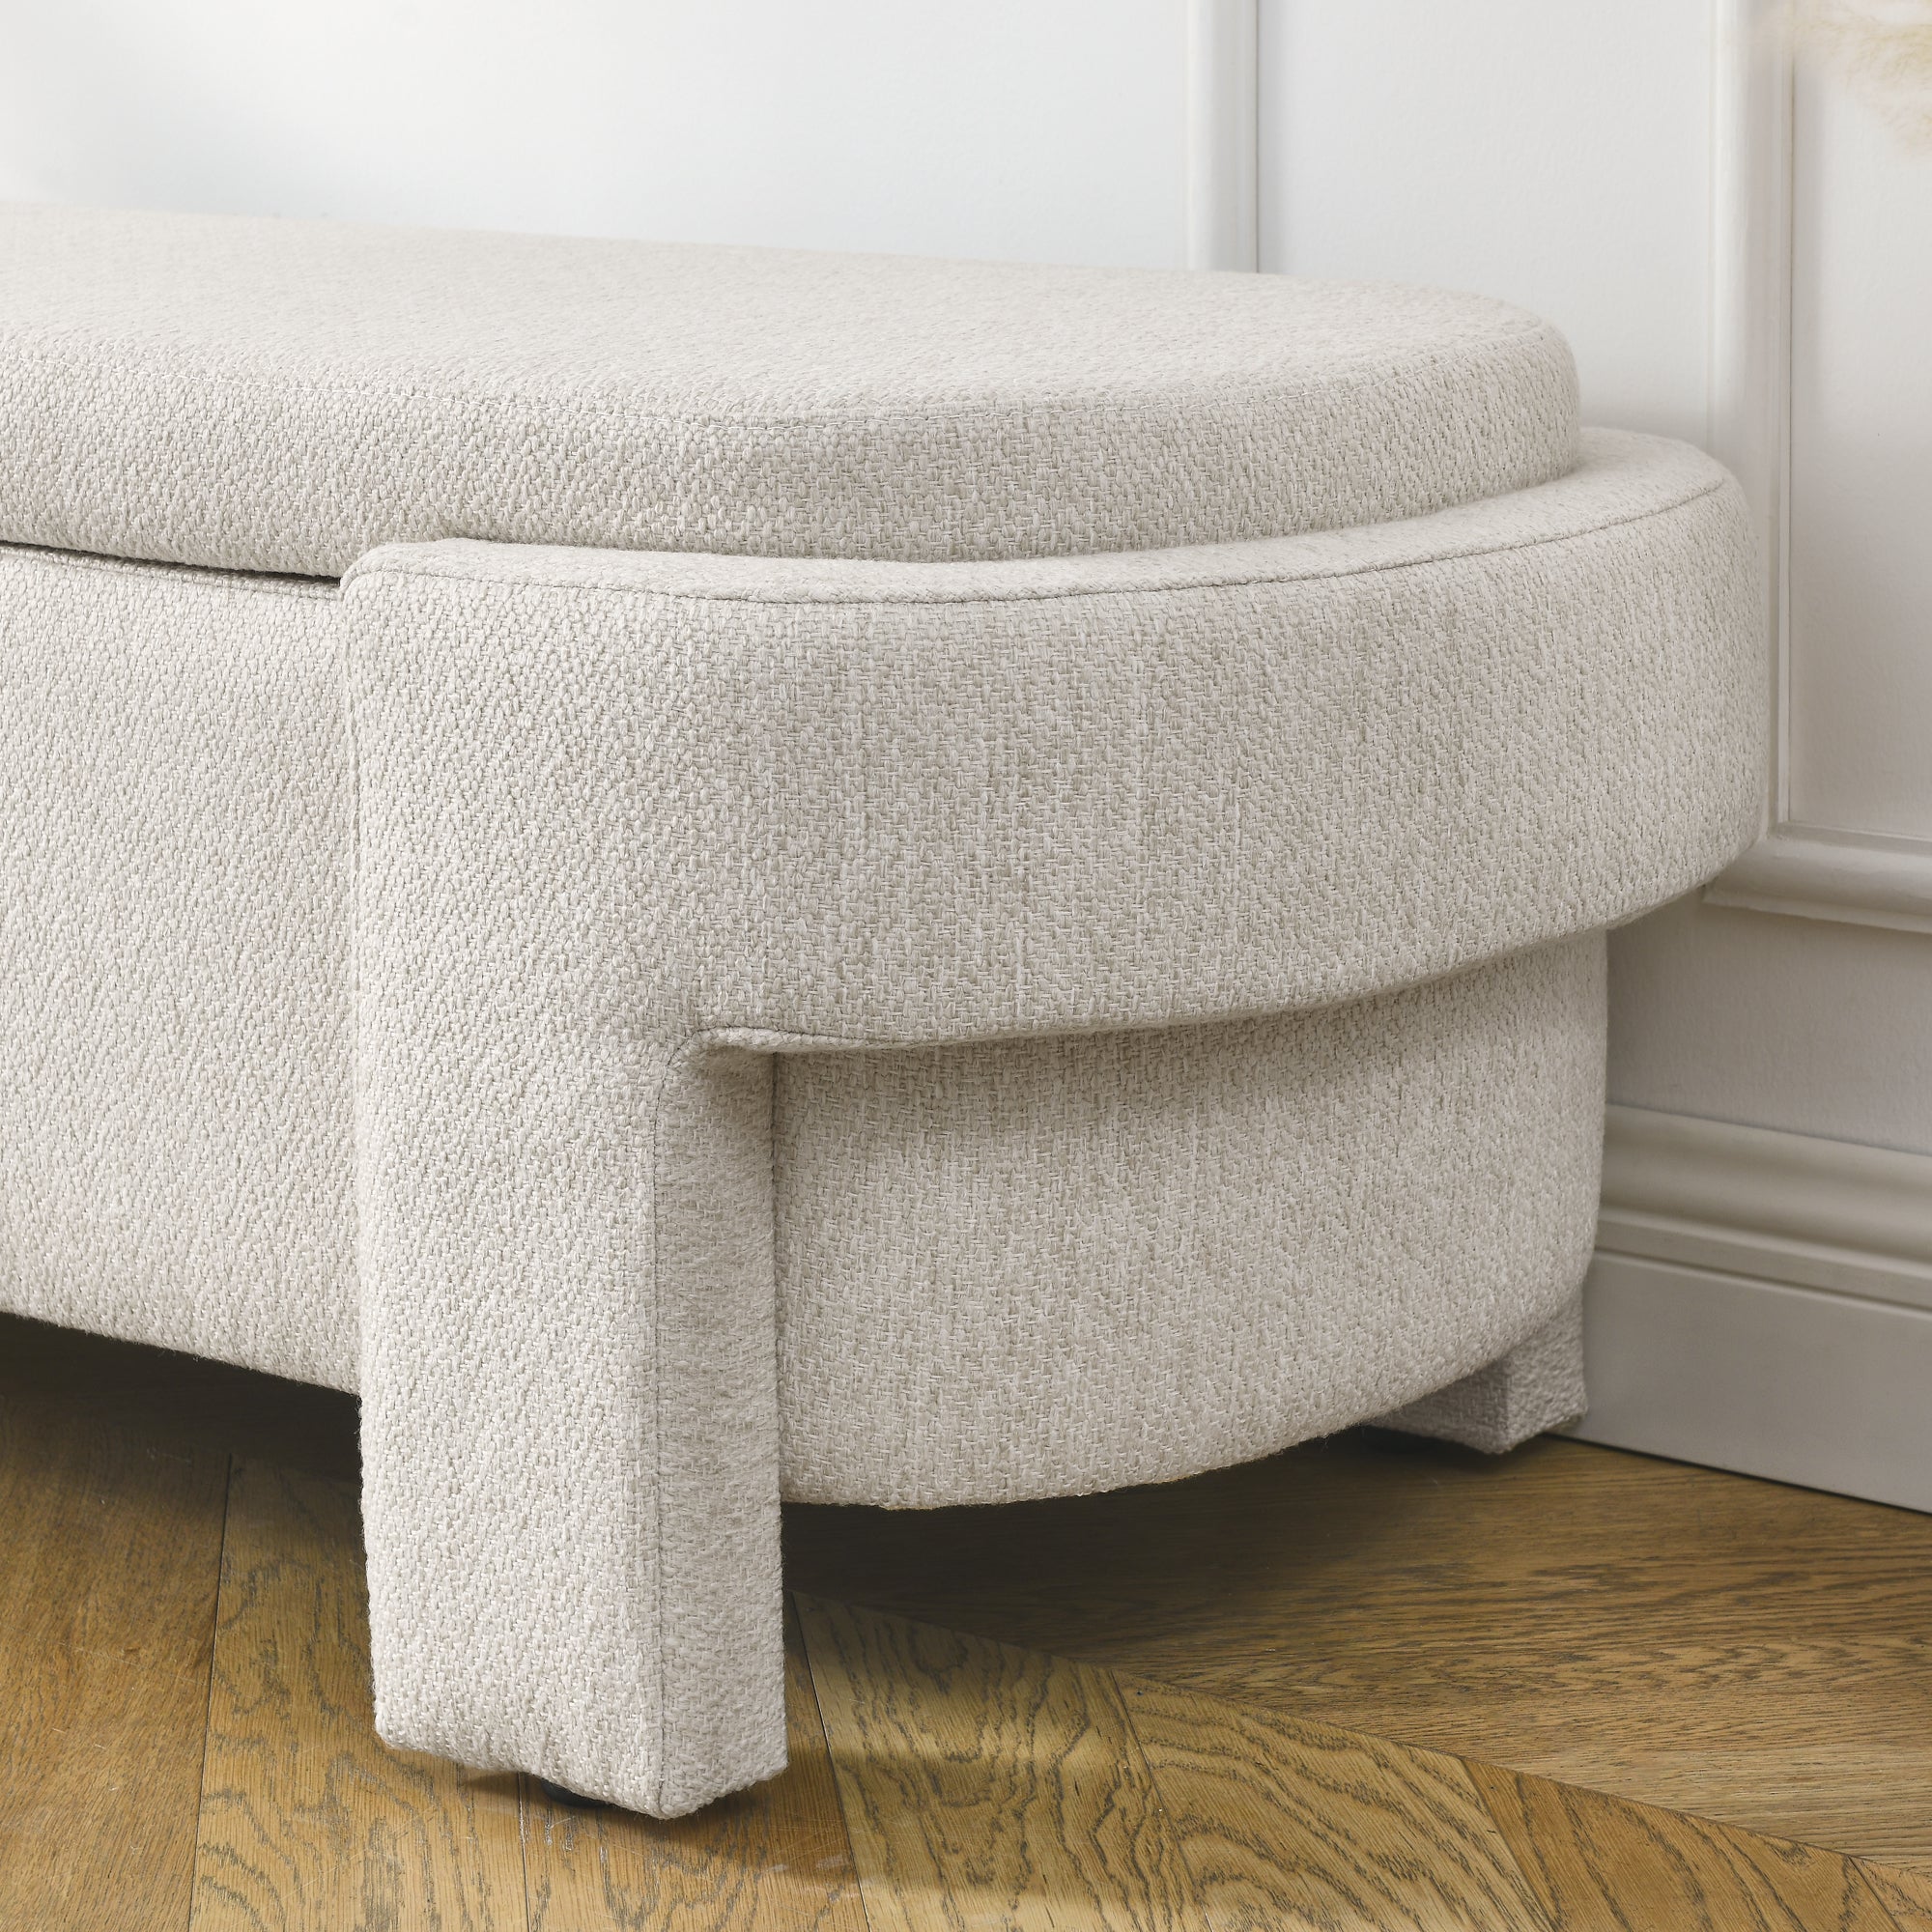 Linen Fabric Upholstered Bench with Large Storage Space - Beige